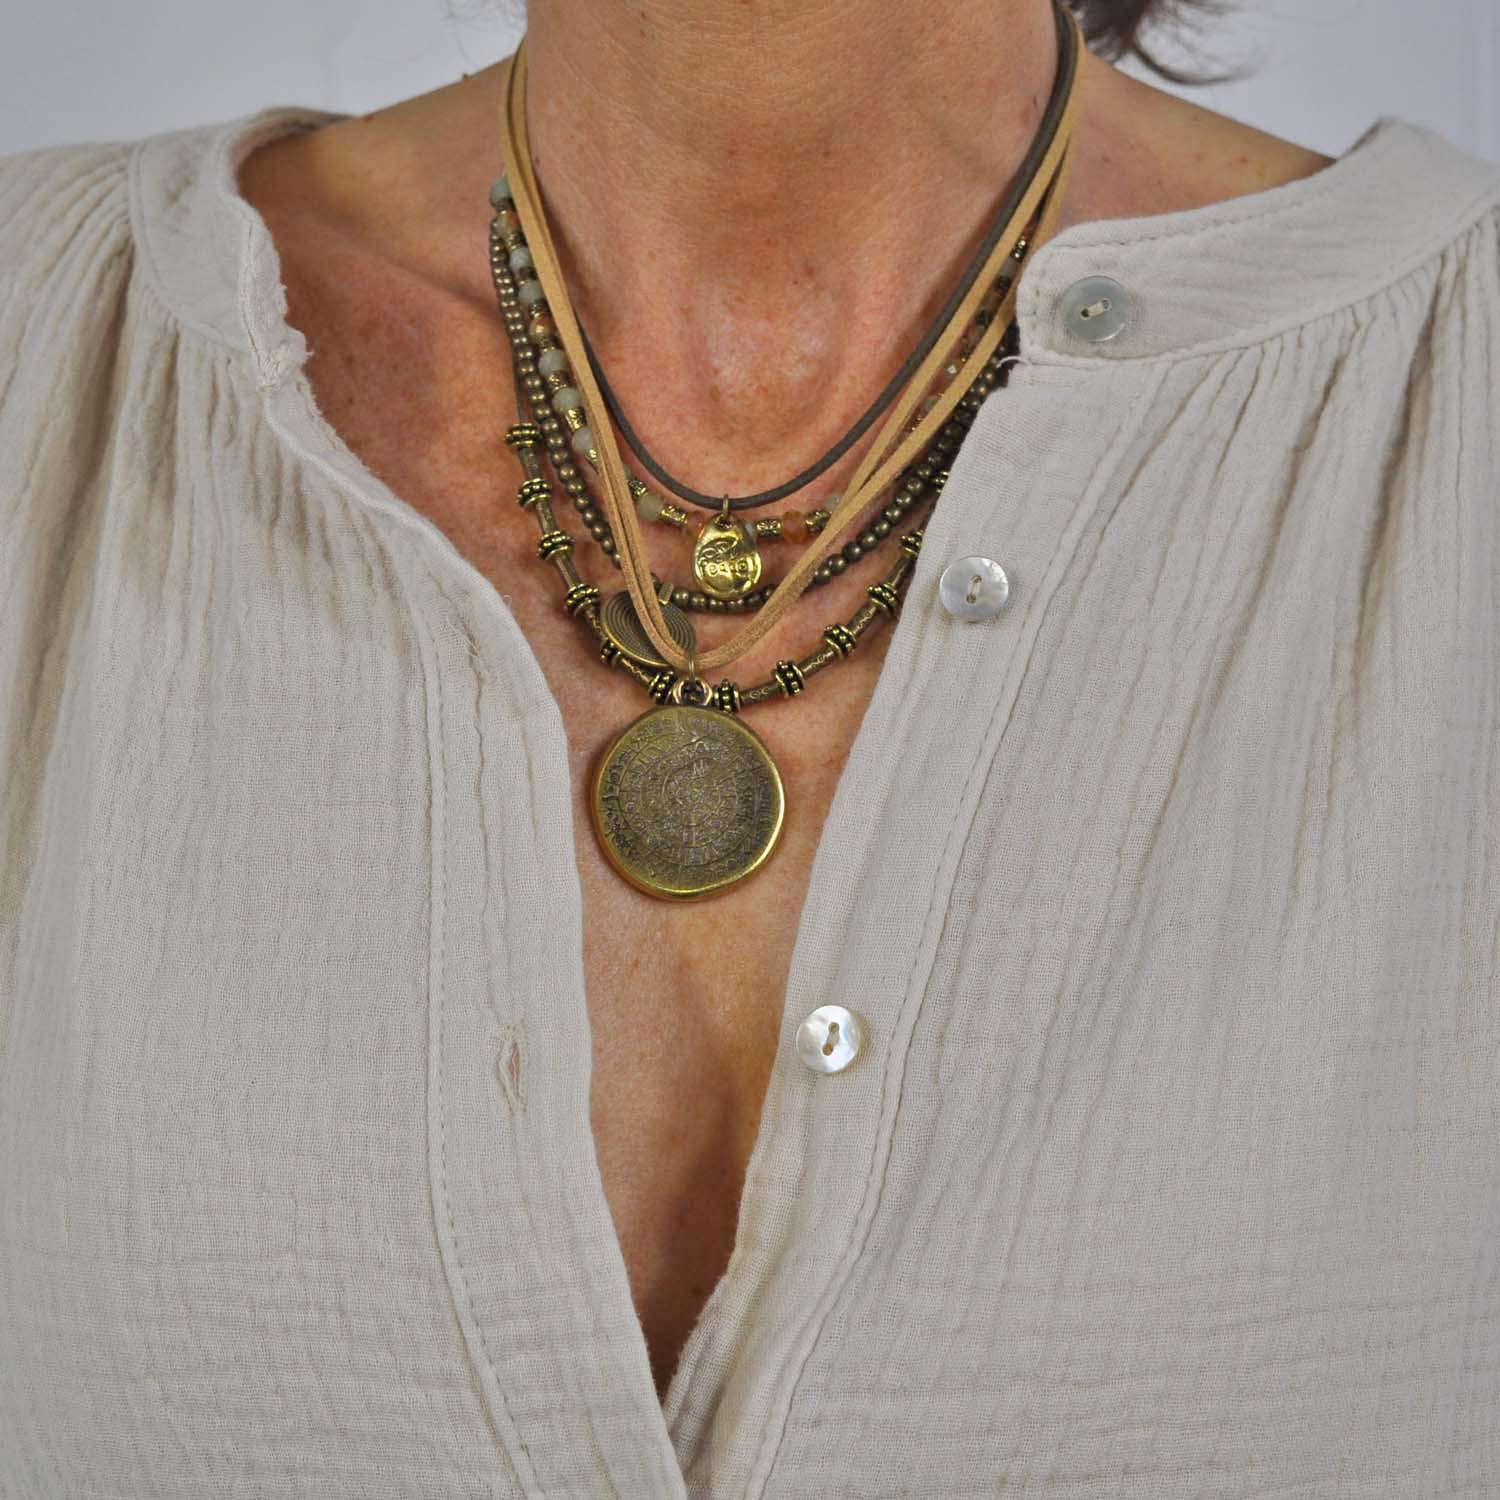 Beige and golden layered necklace